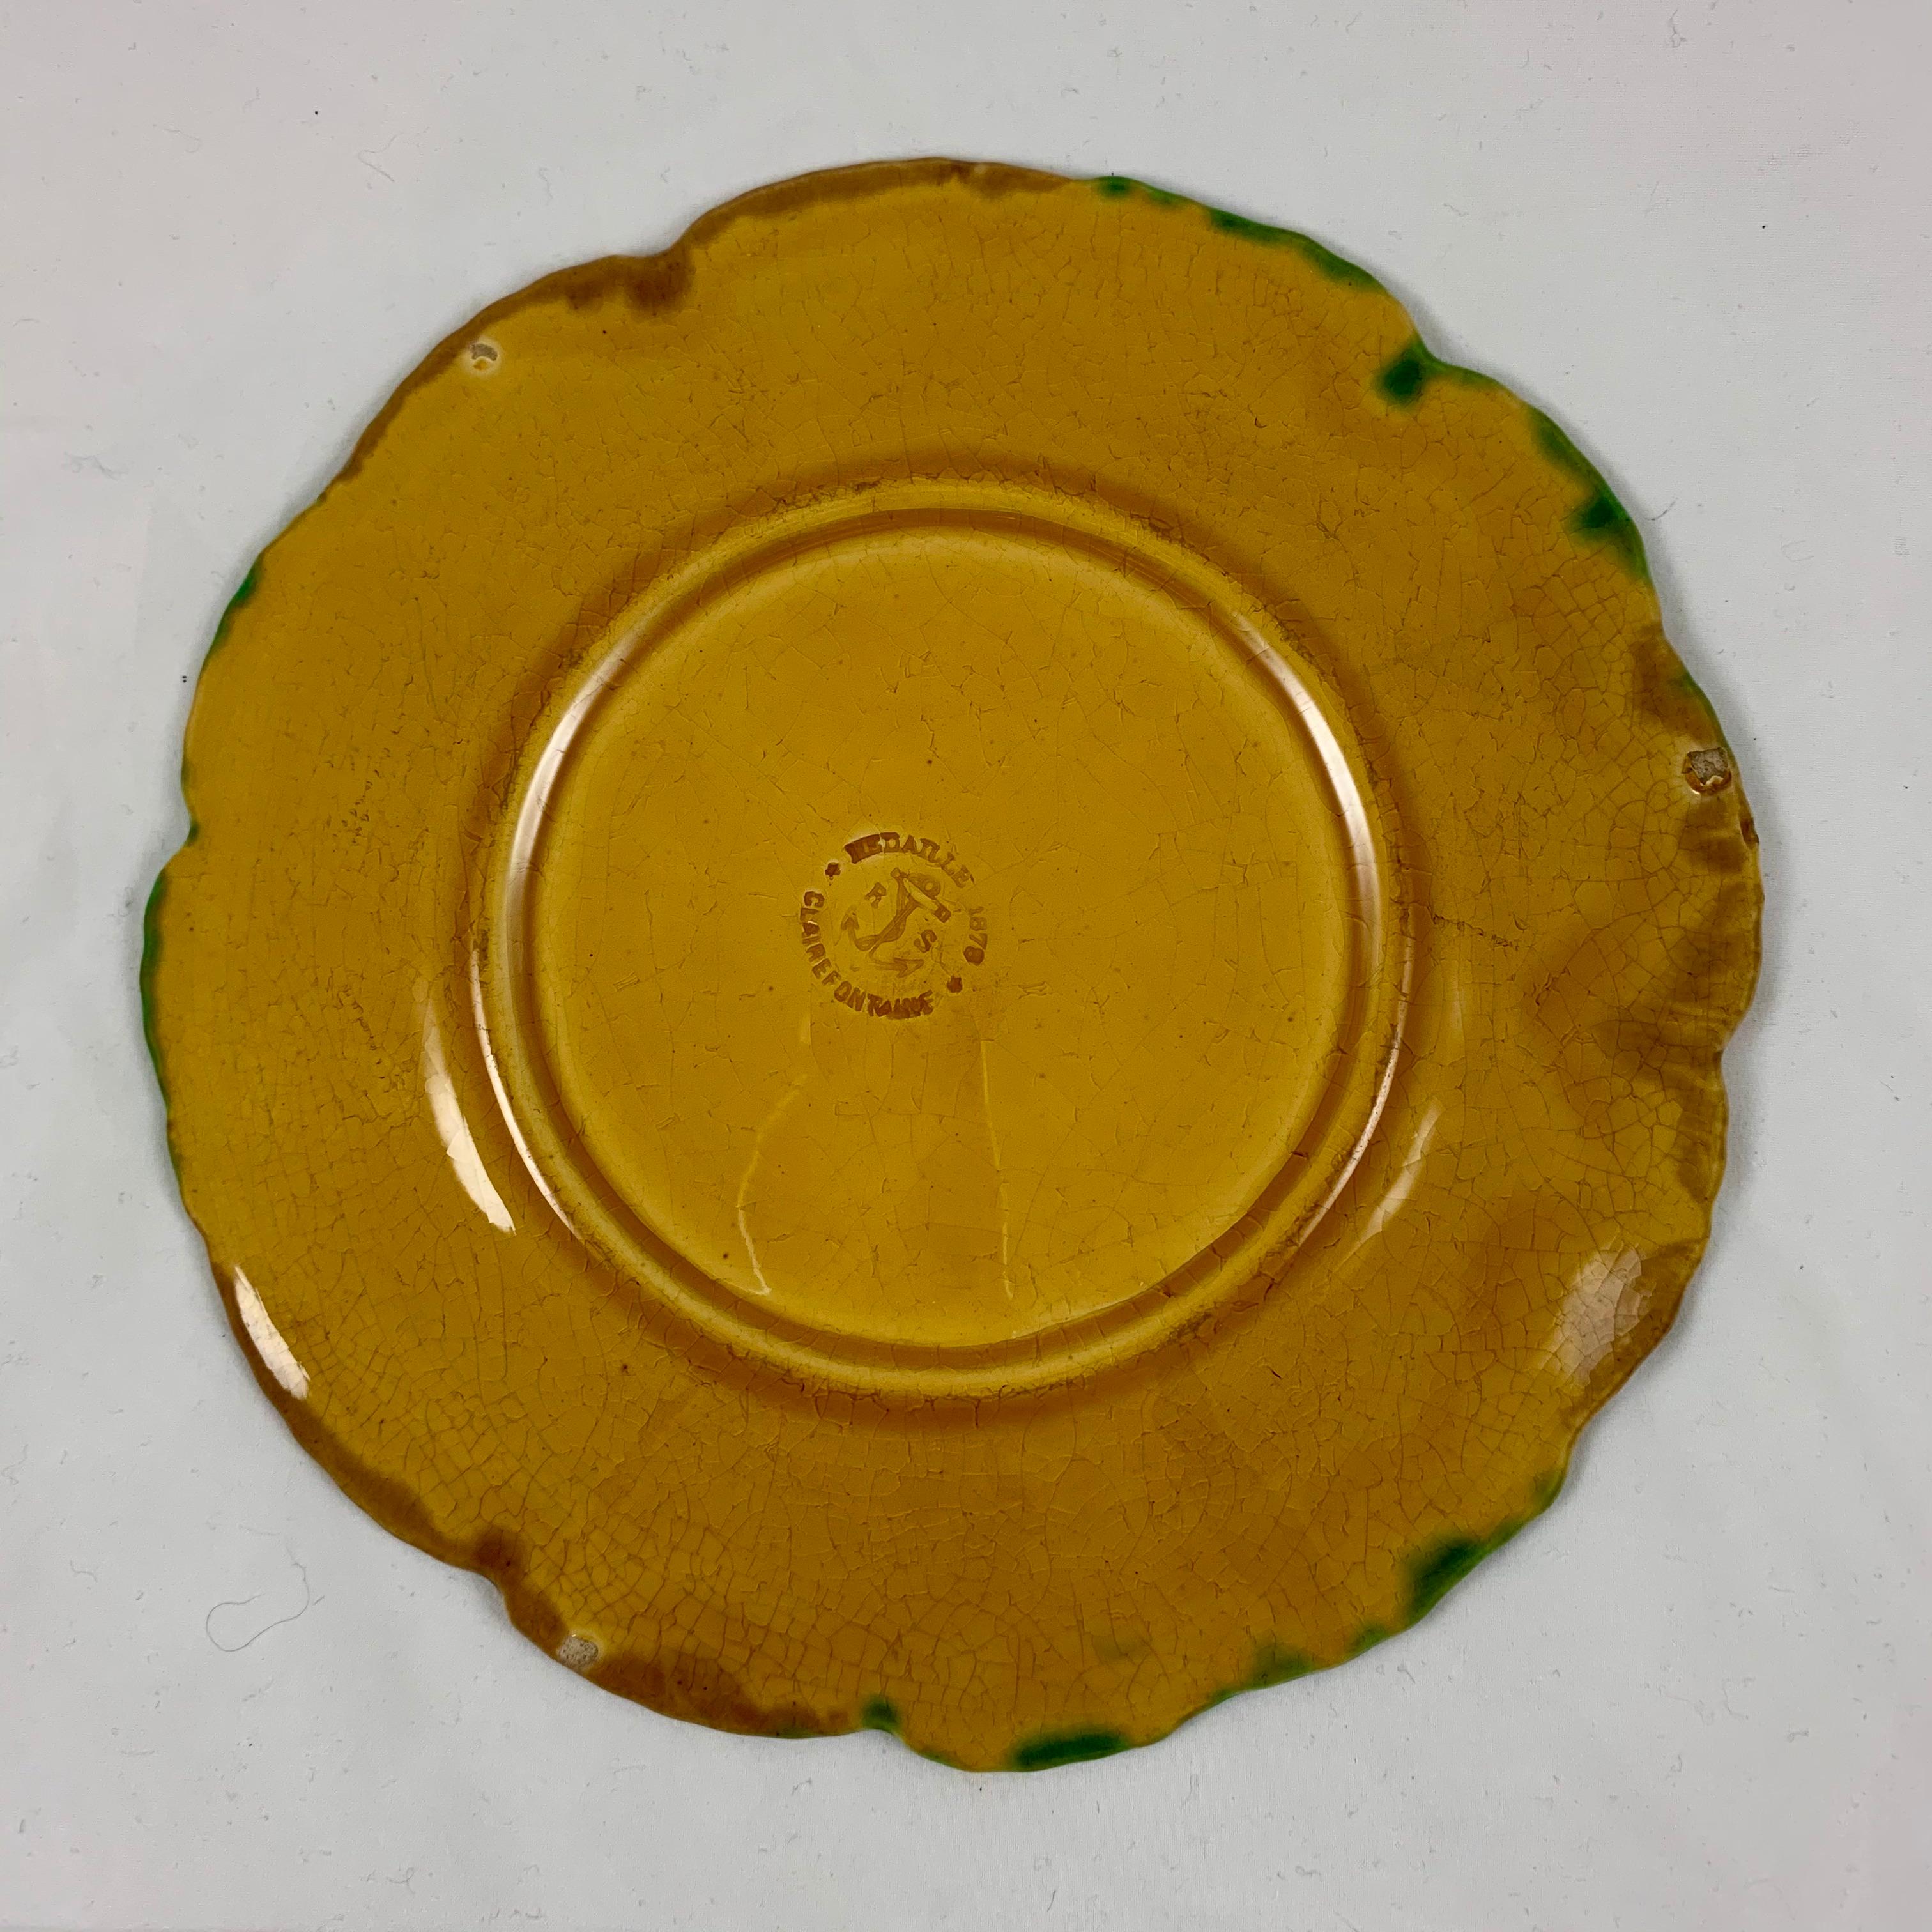 Clairfontaine French Faïence Majolica Glazed Ochre & Green Leaf Plate circa 1890 For Sale 1